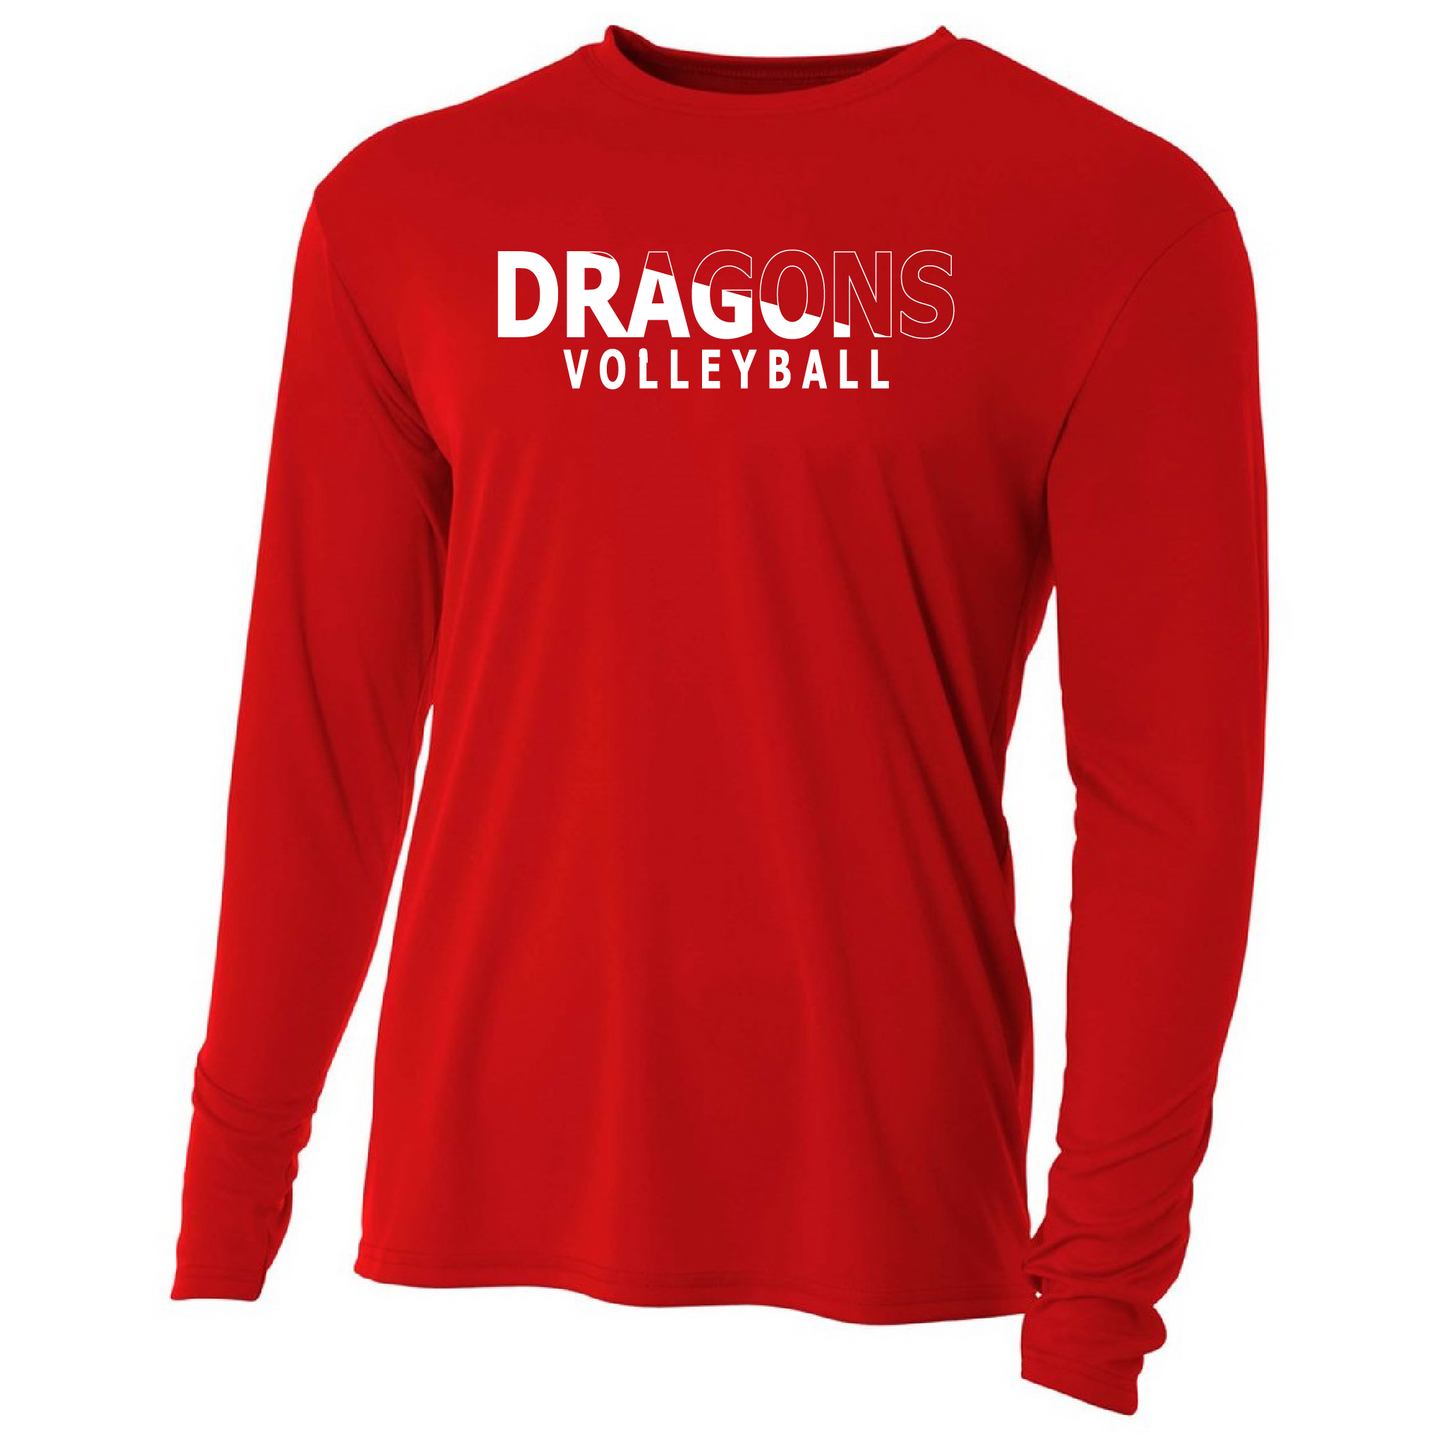 Mens L/S T-Shirt - Dragons Volleyball Slashed White